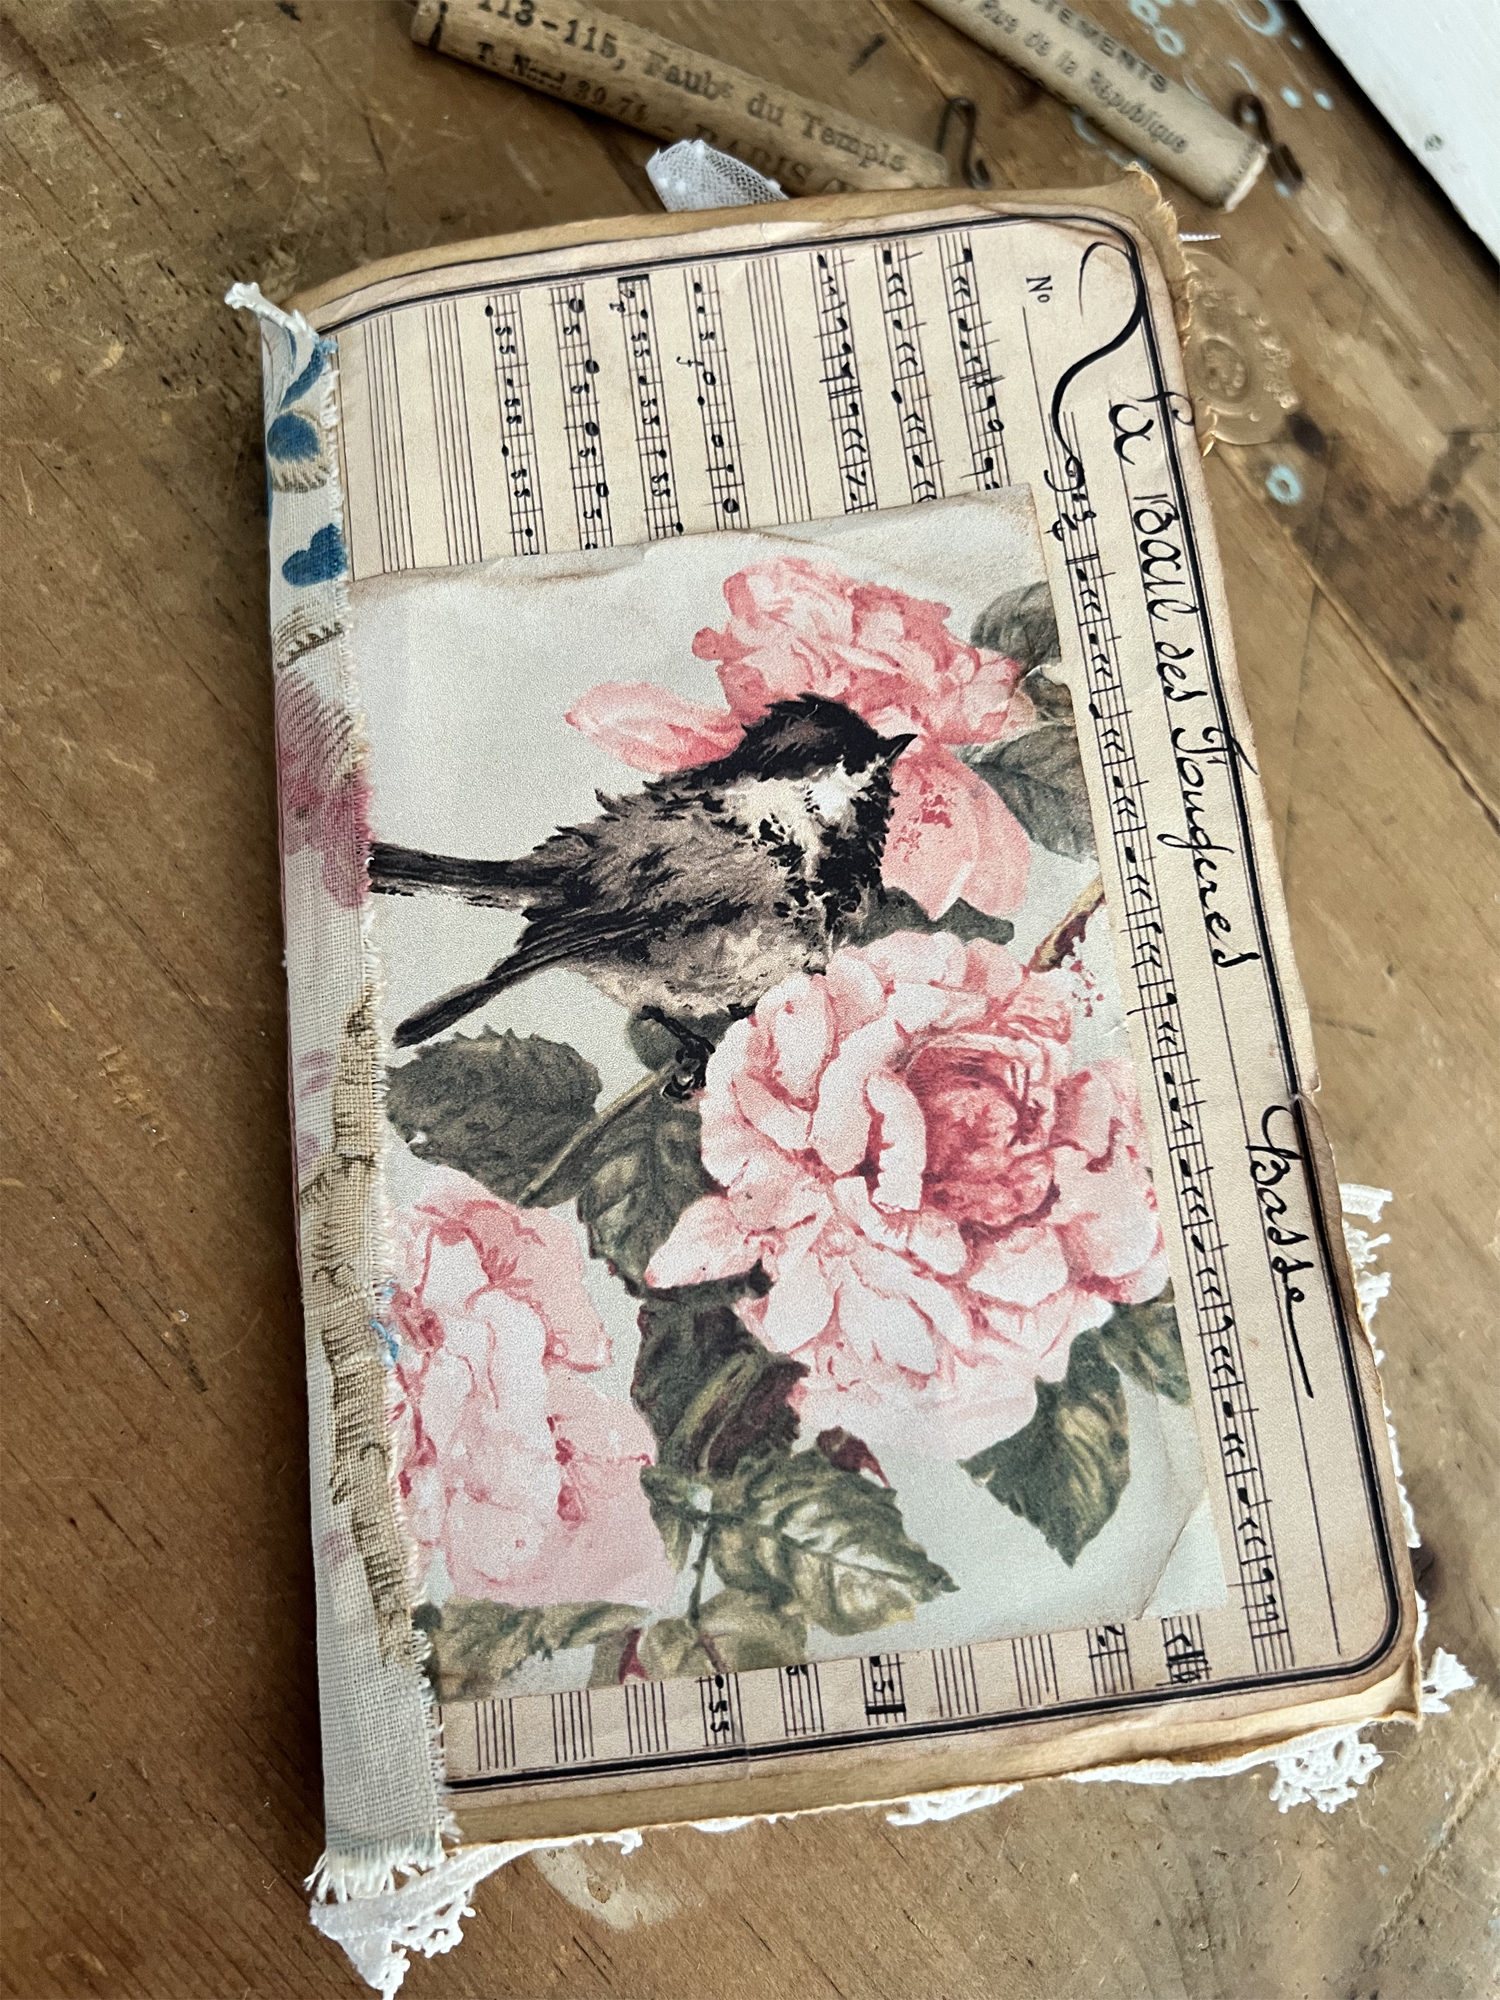 Junk Journal Page Ideas (Part 3 of Junk Journal Course)! - The Graphics  Fairy